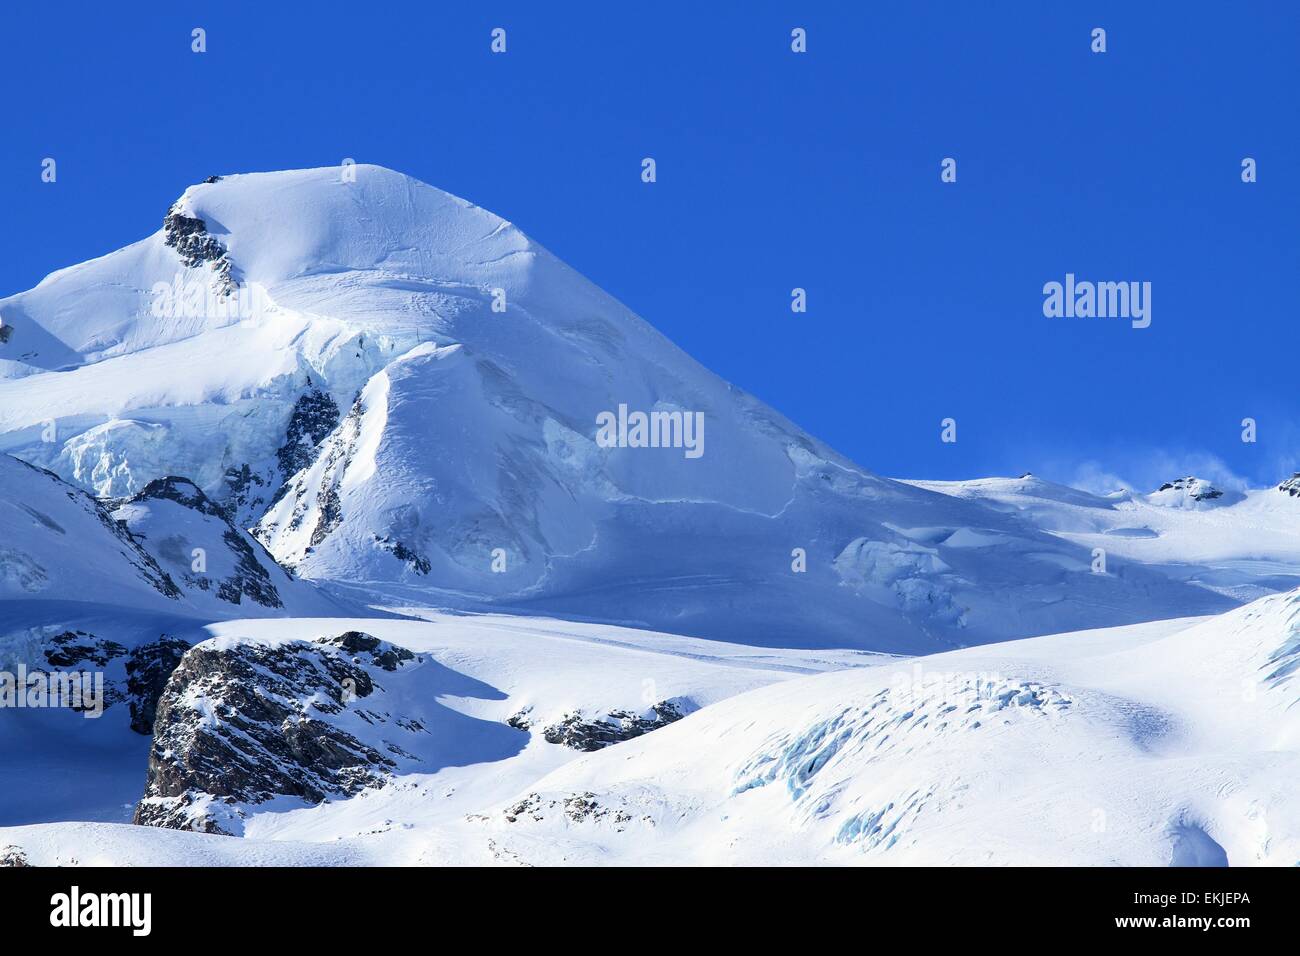 Allalinhorn mountain view from Saas Fee at dawn, Switzerland Stock Photo